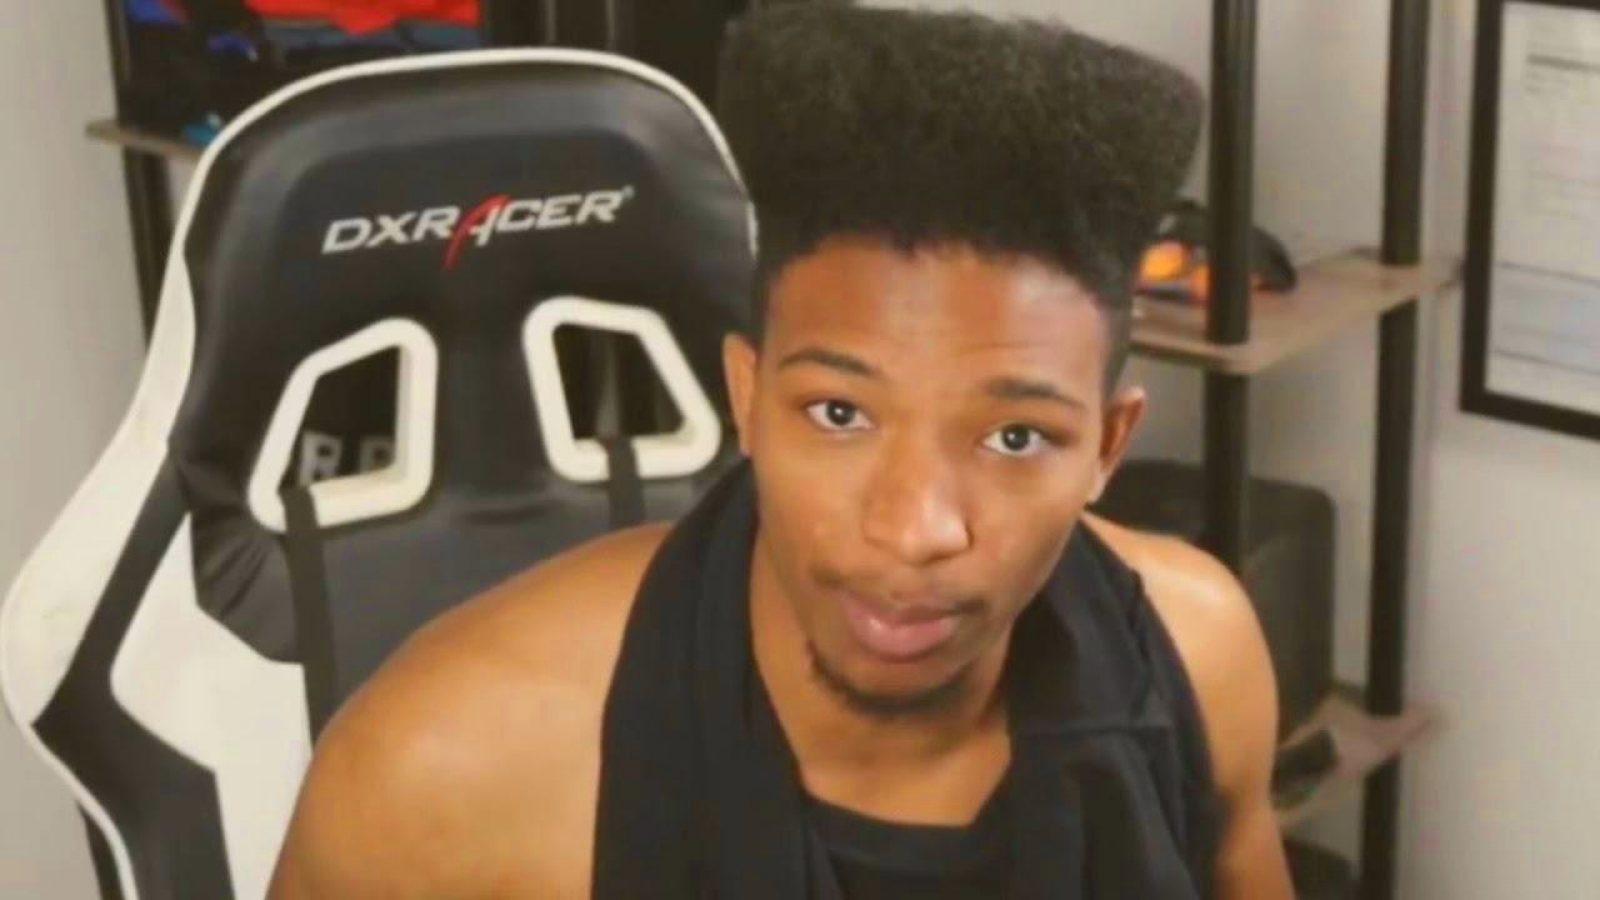 Youtubers That Did - YouTuber Etika detained by NYPD during Instagram Live broadcast - Dexerto